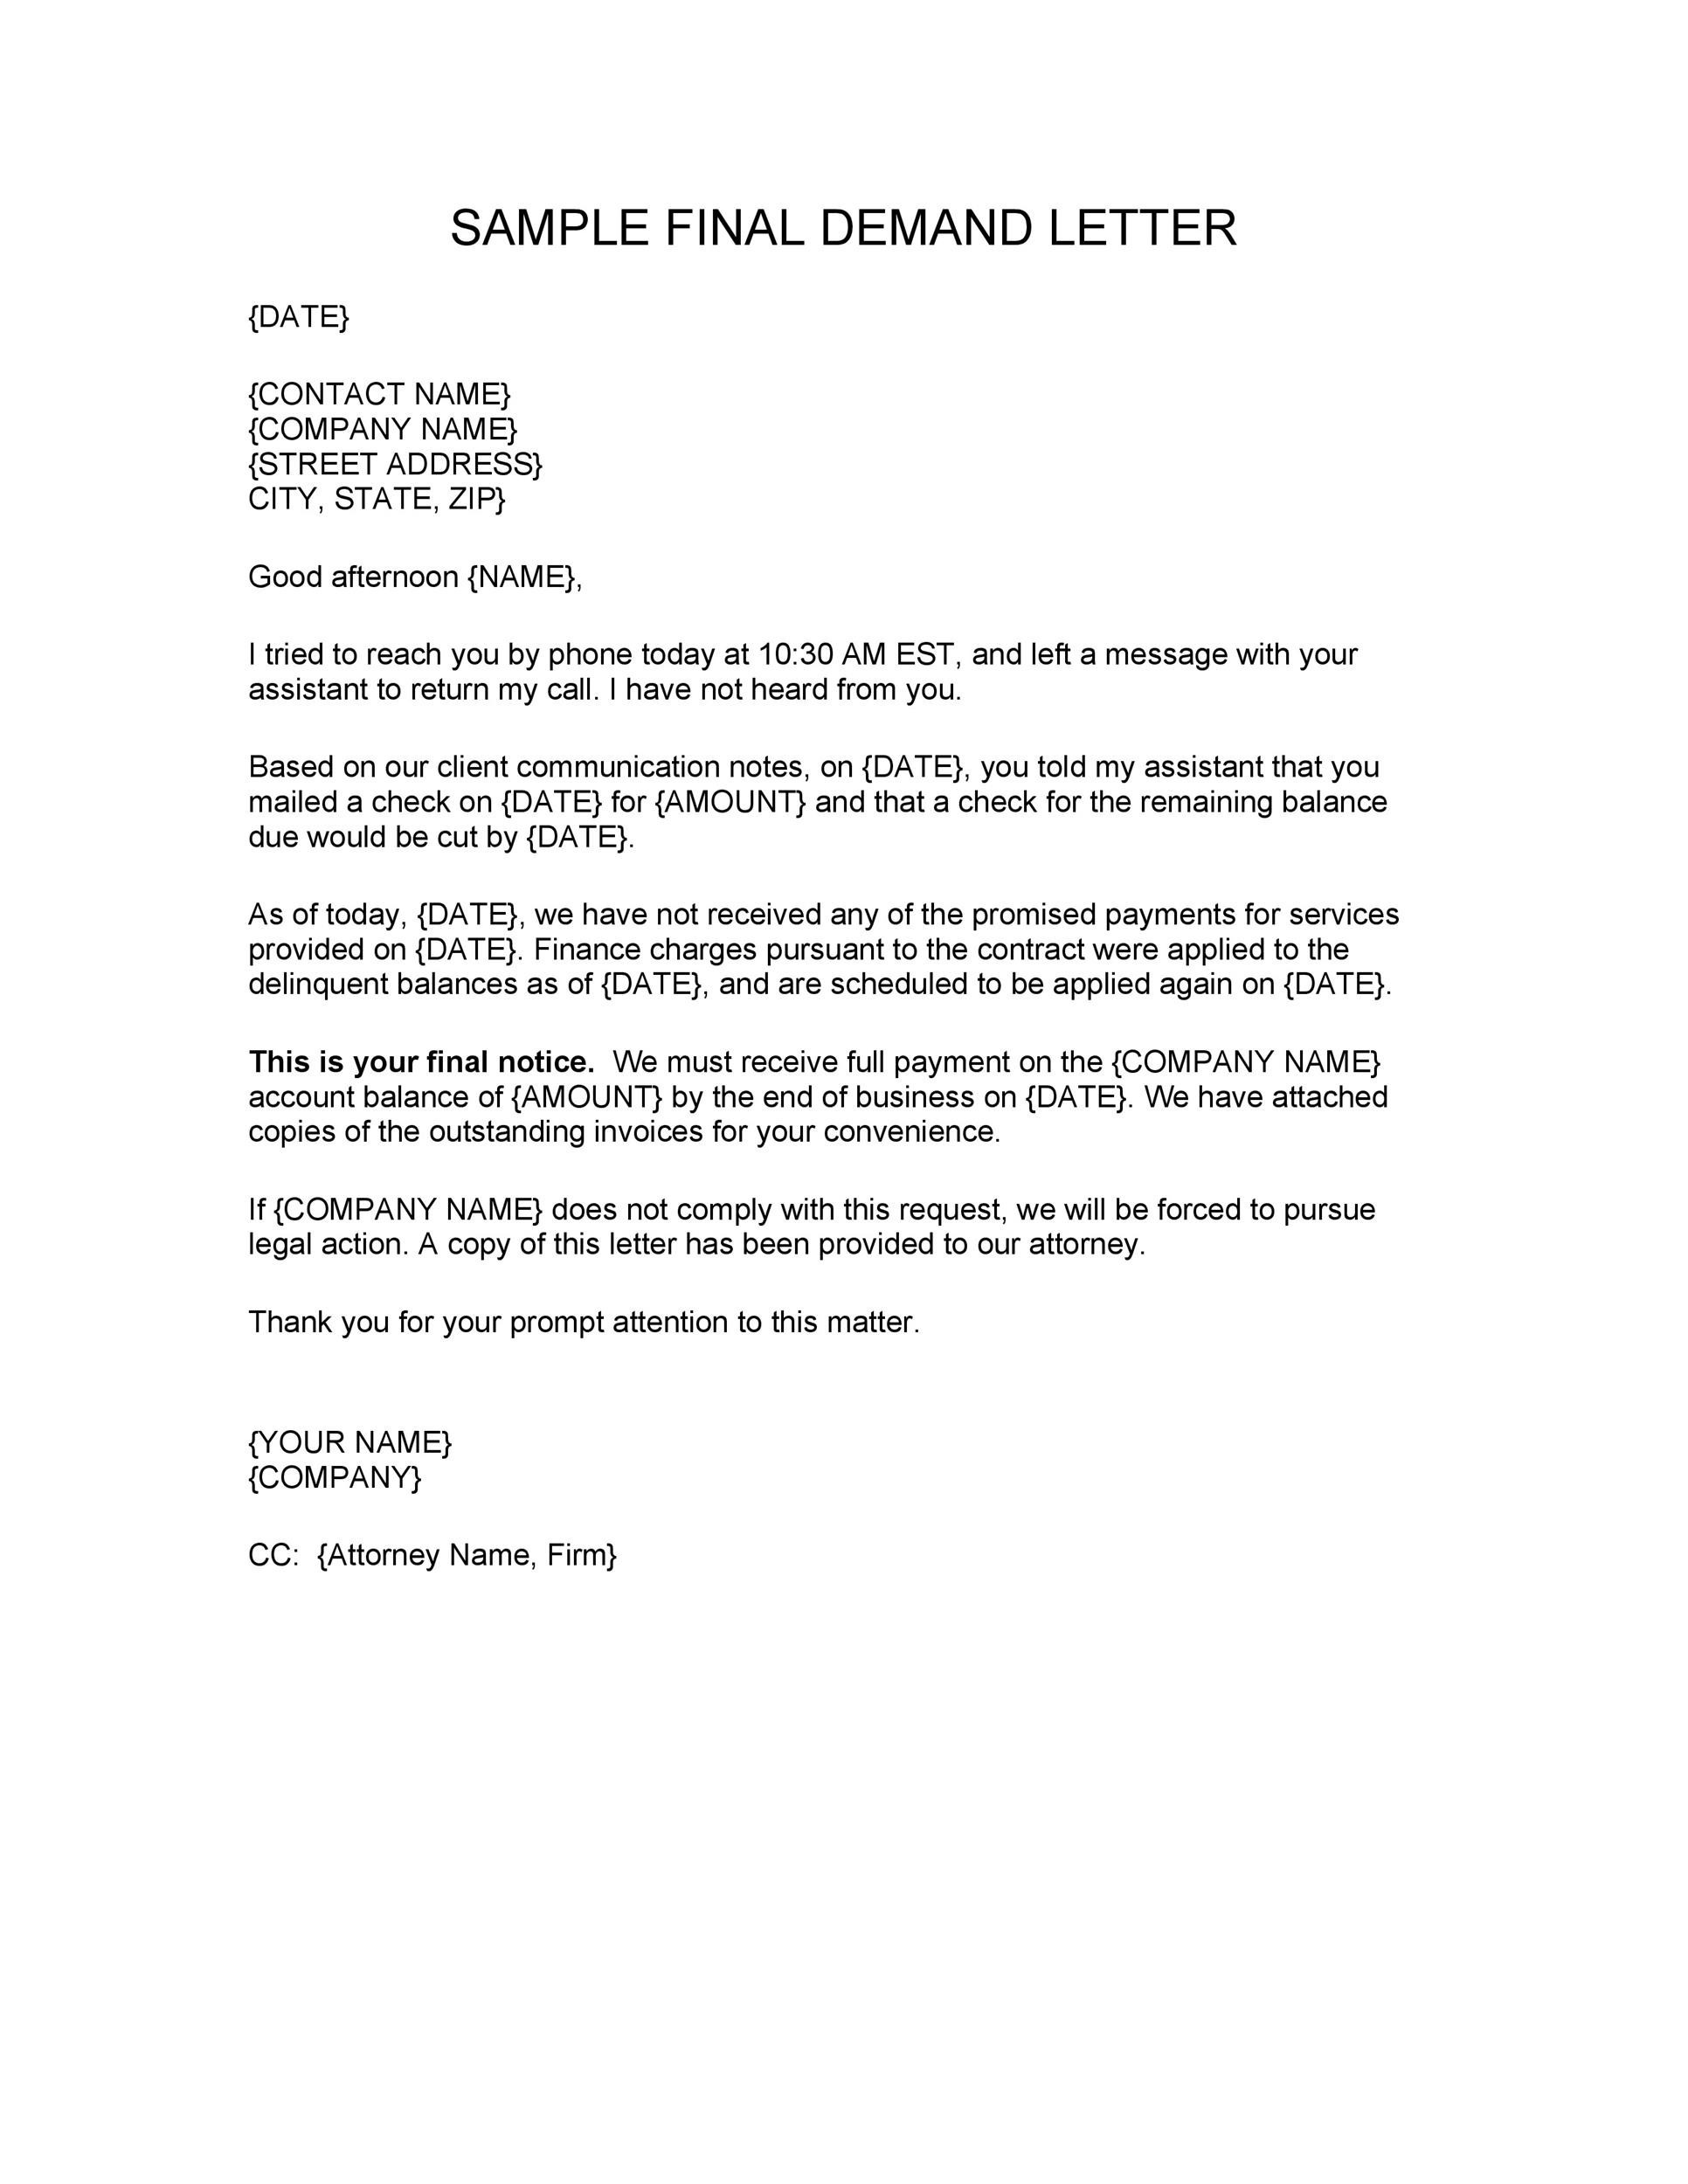 Example Of A Demand Letter From An Attorney from templatelab.com